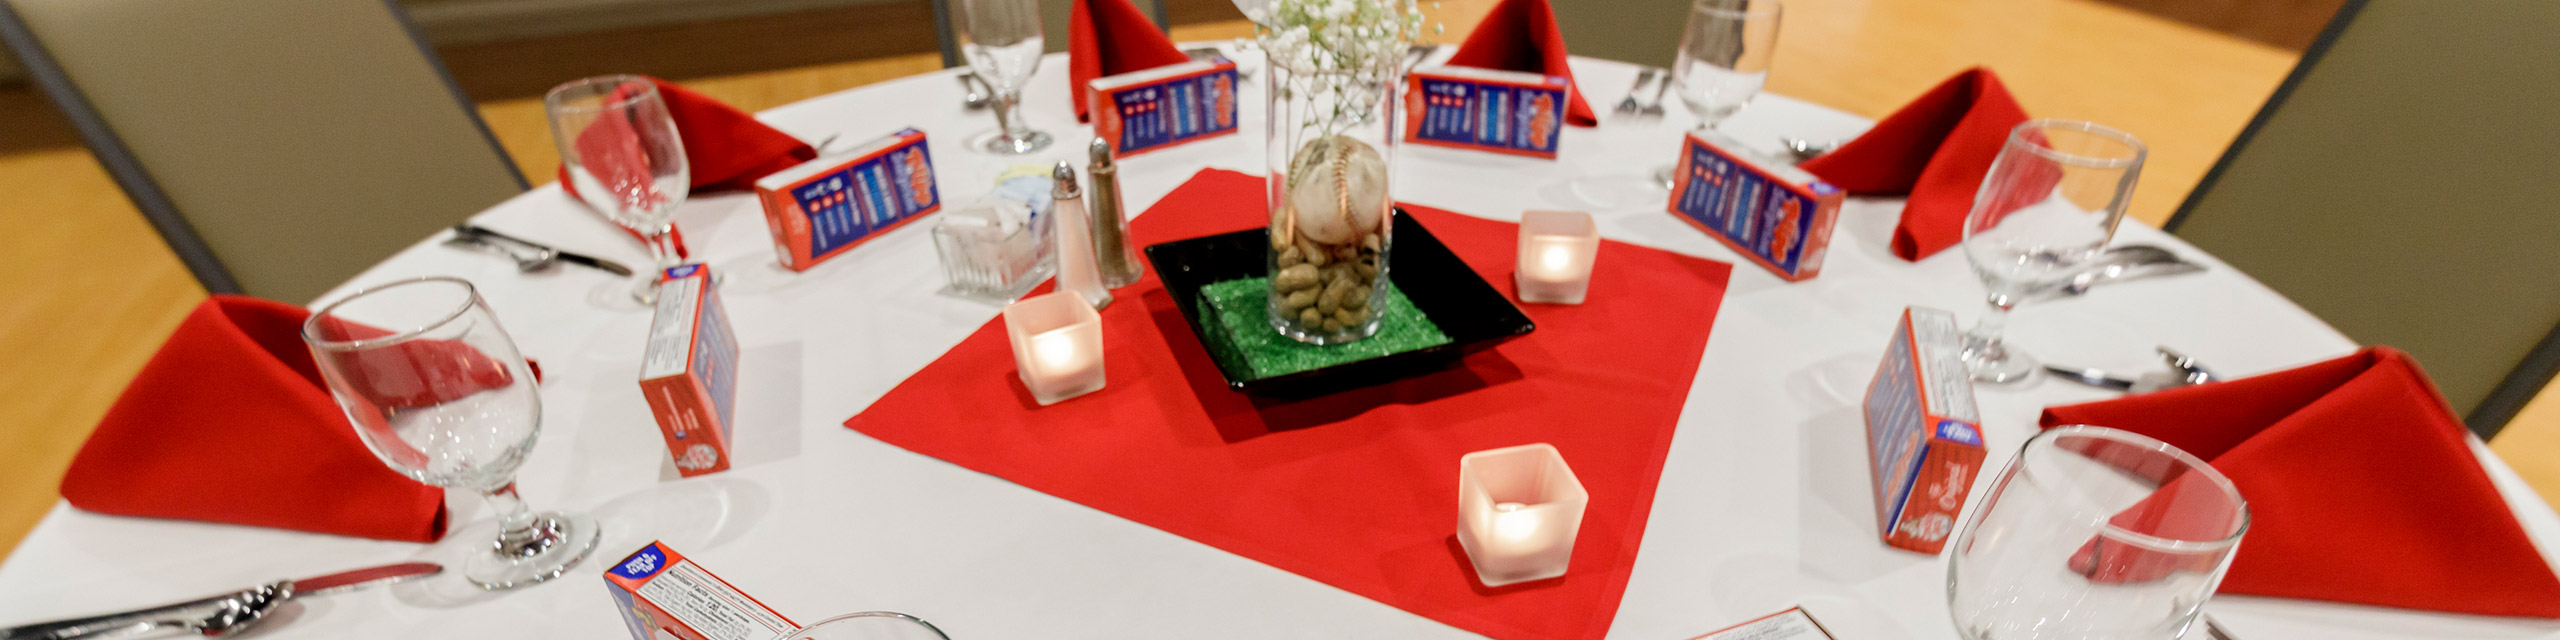 Wedding Guest Table.